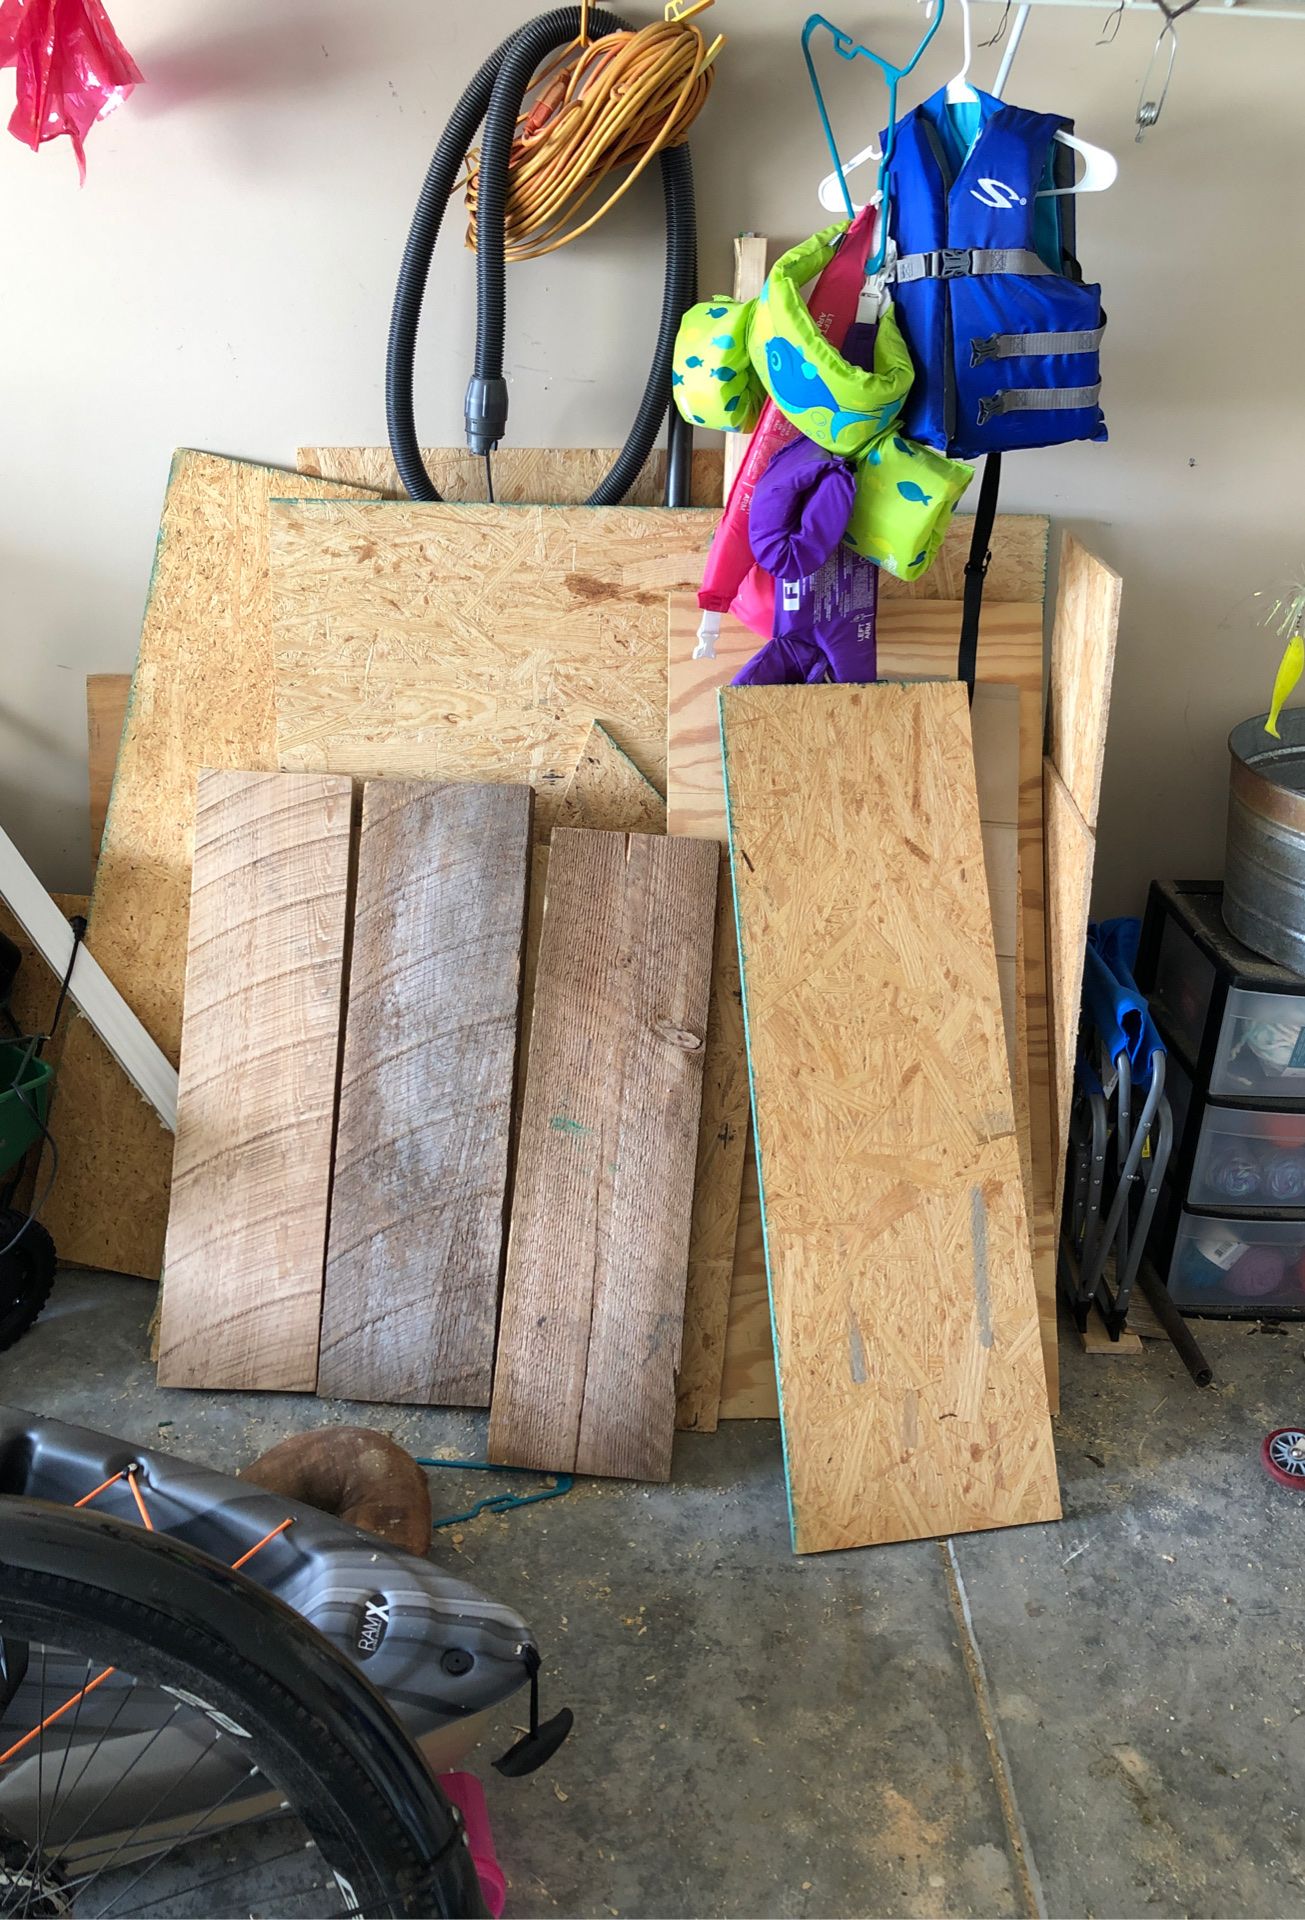 Carpentry scraps all cuts and board types